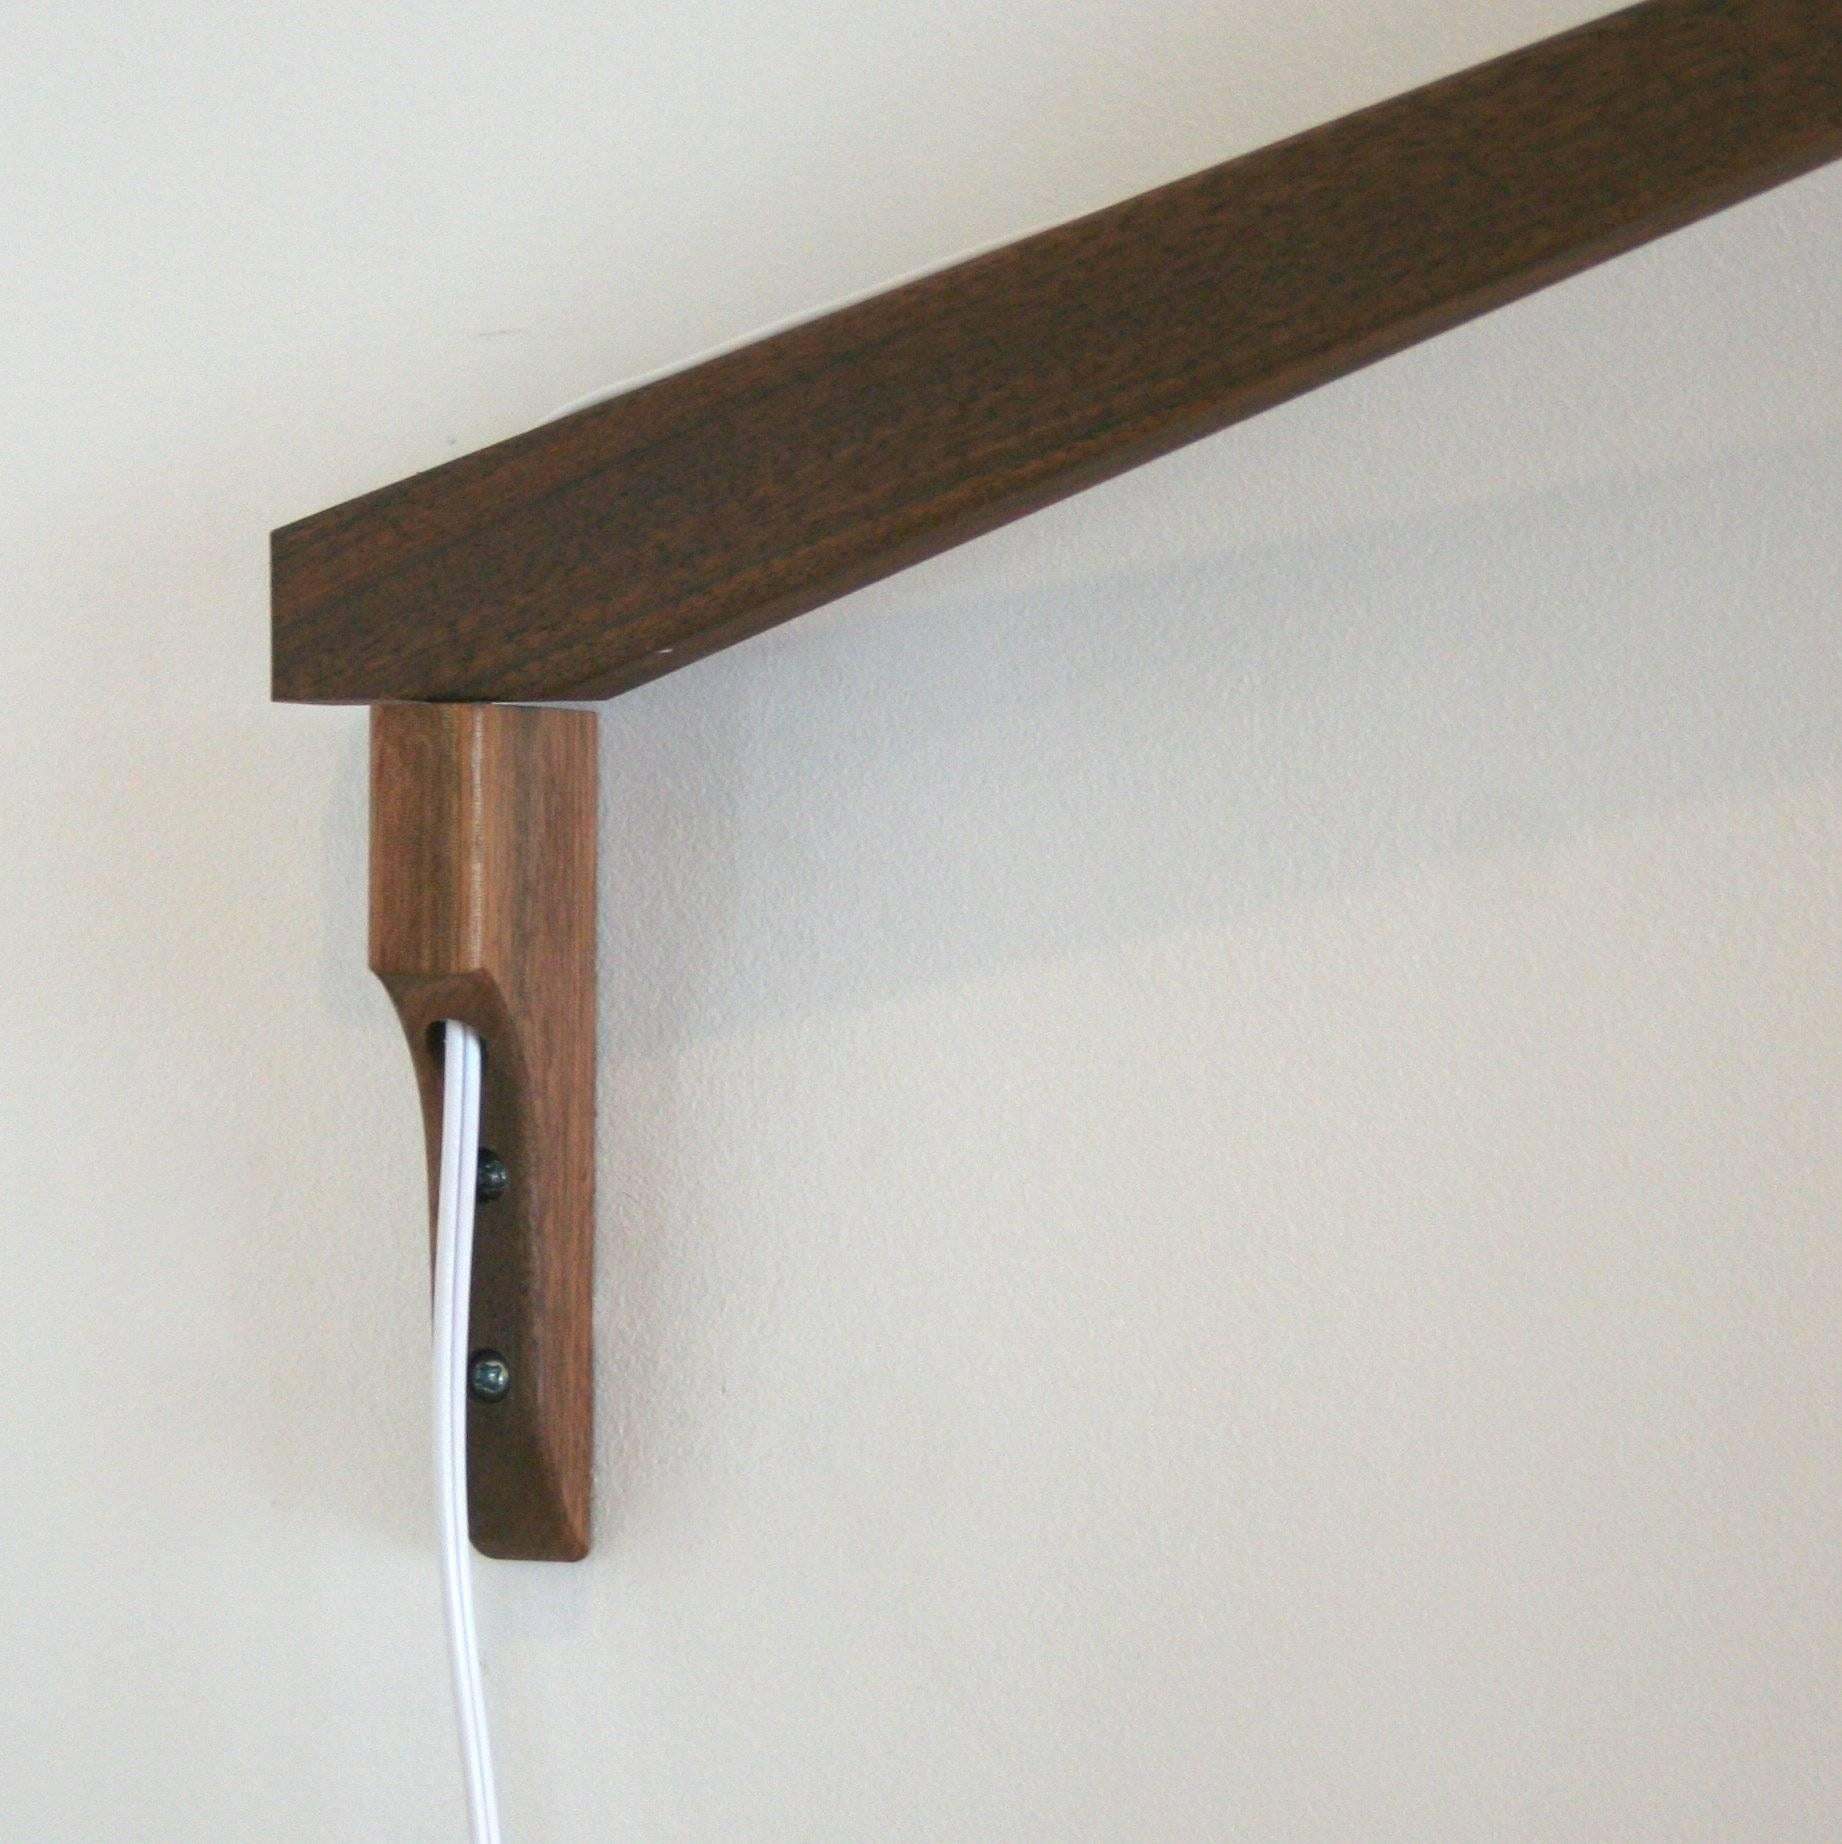 A swivelling wall mount with a full 180 degree range of motion. The pendant is a unique fibreglass and cord shade accented in a walnut frame. Measures 80